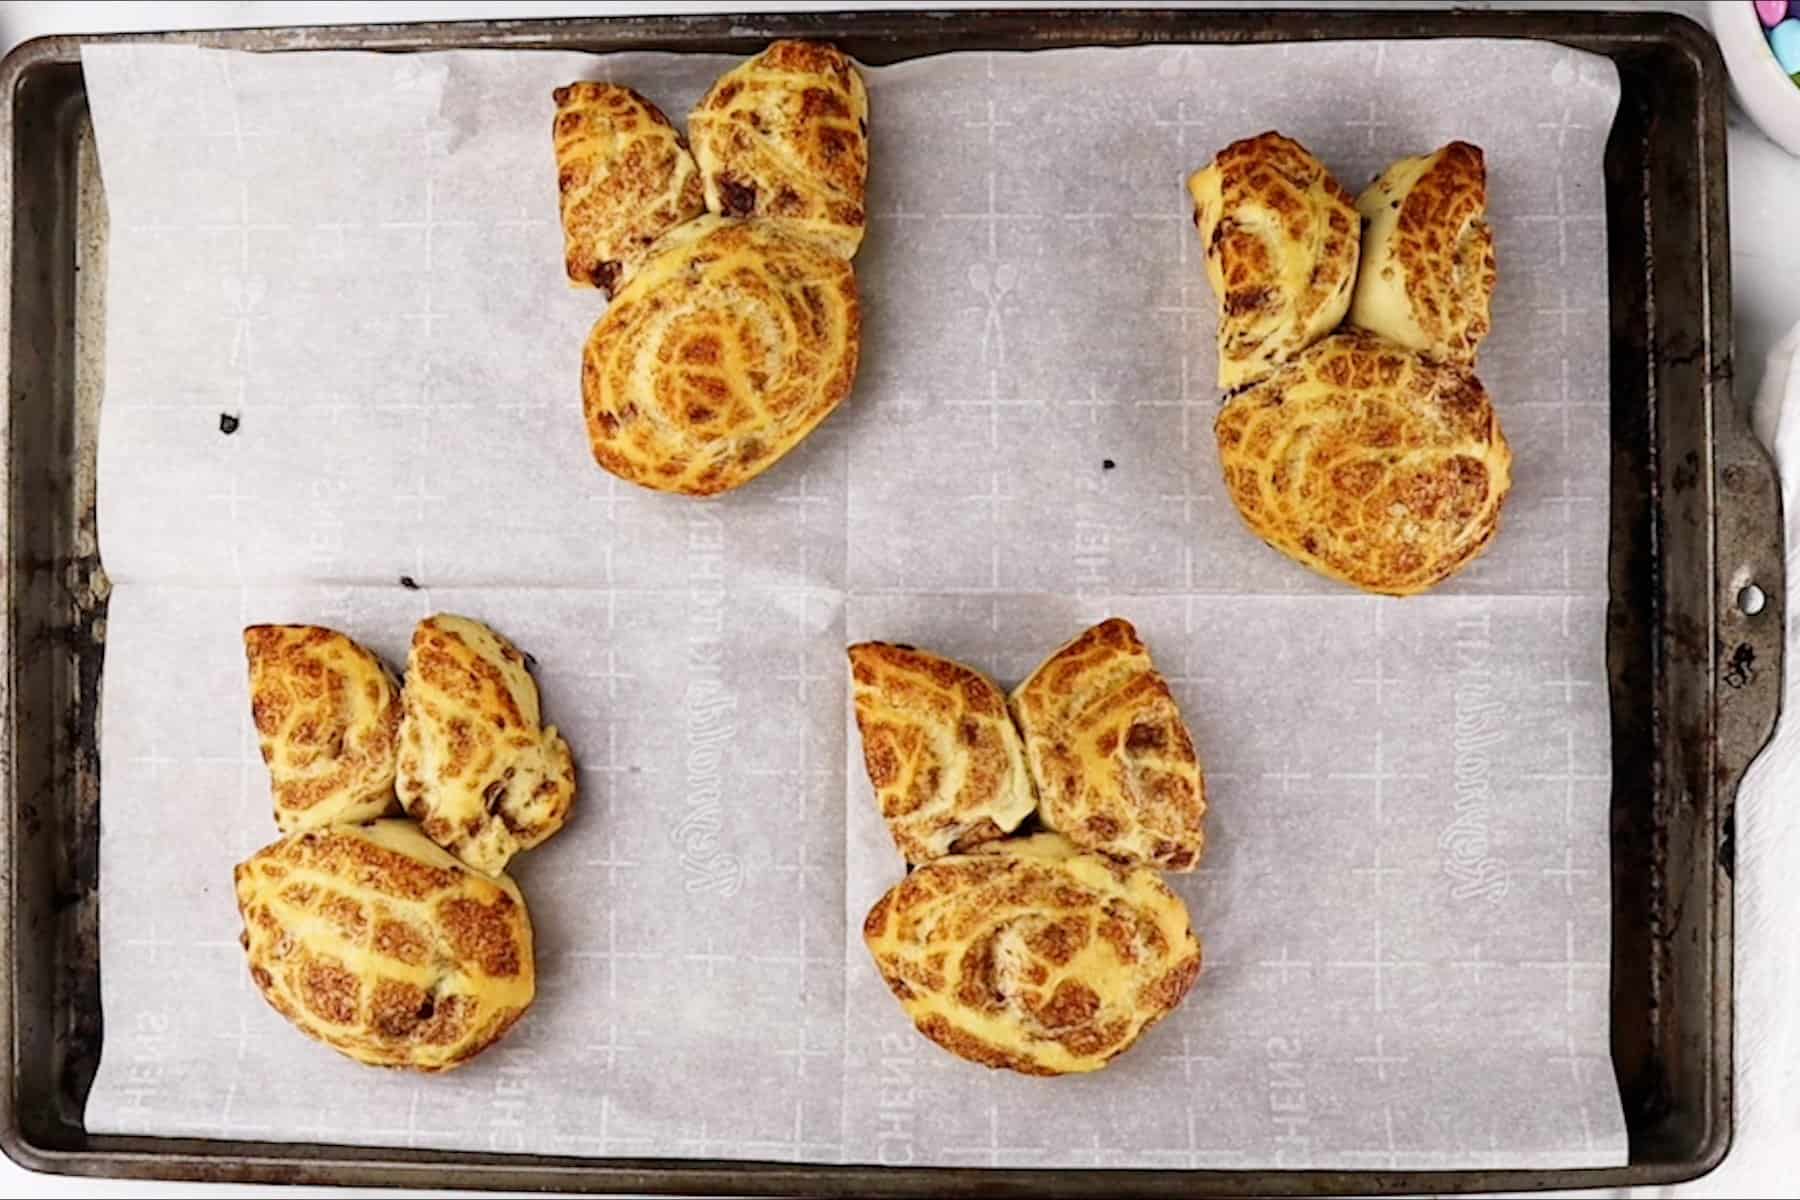 bunny cinnamon rolls that don't unroll after baking